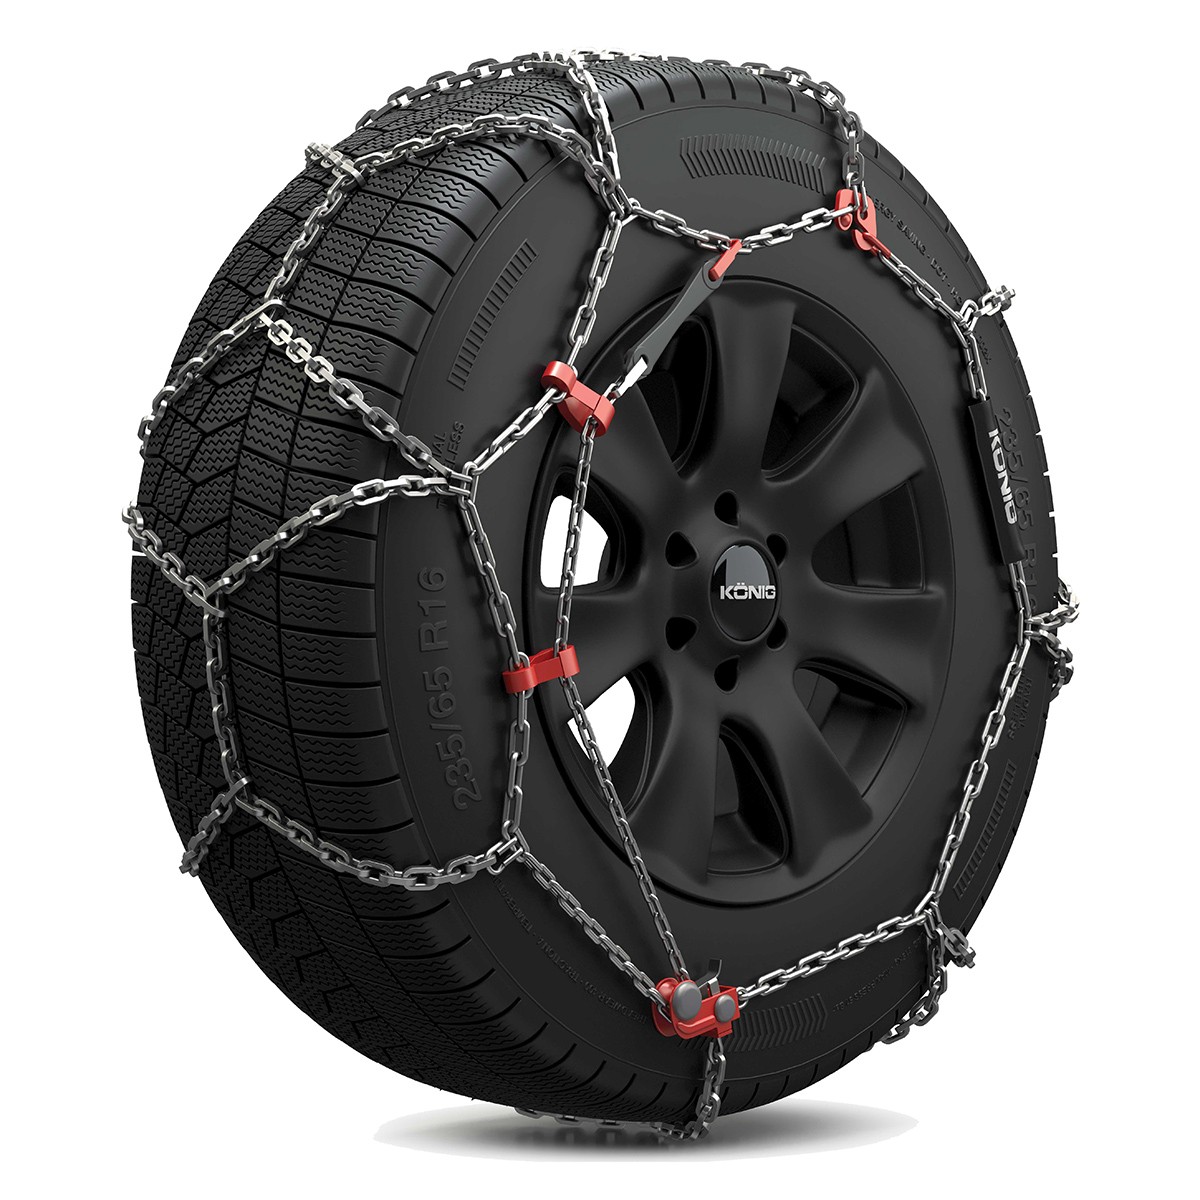 Michelin Fast Grip 008492 Snow chains with chain tensioner, with mounting  manual, with protective gloves, with storage bag